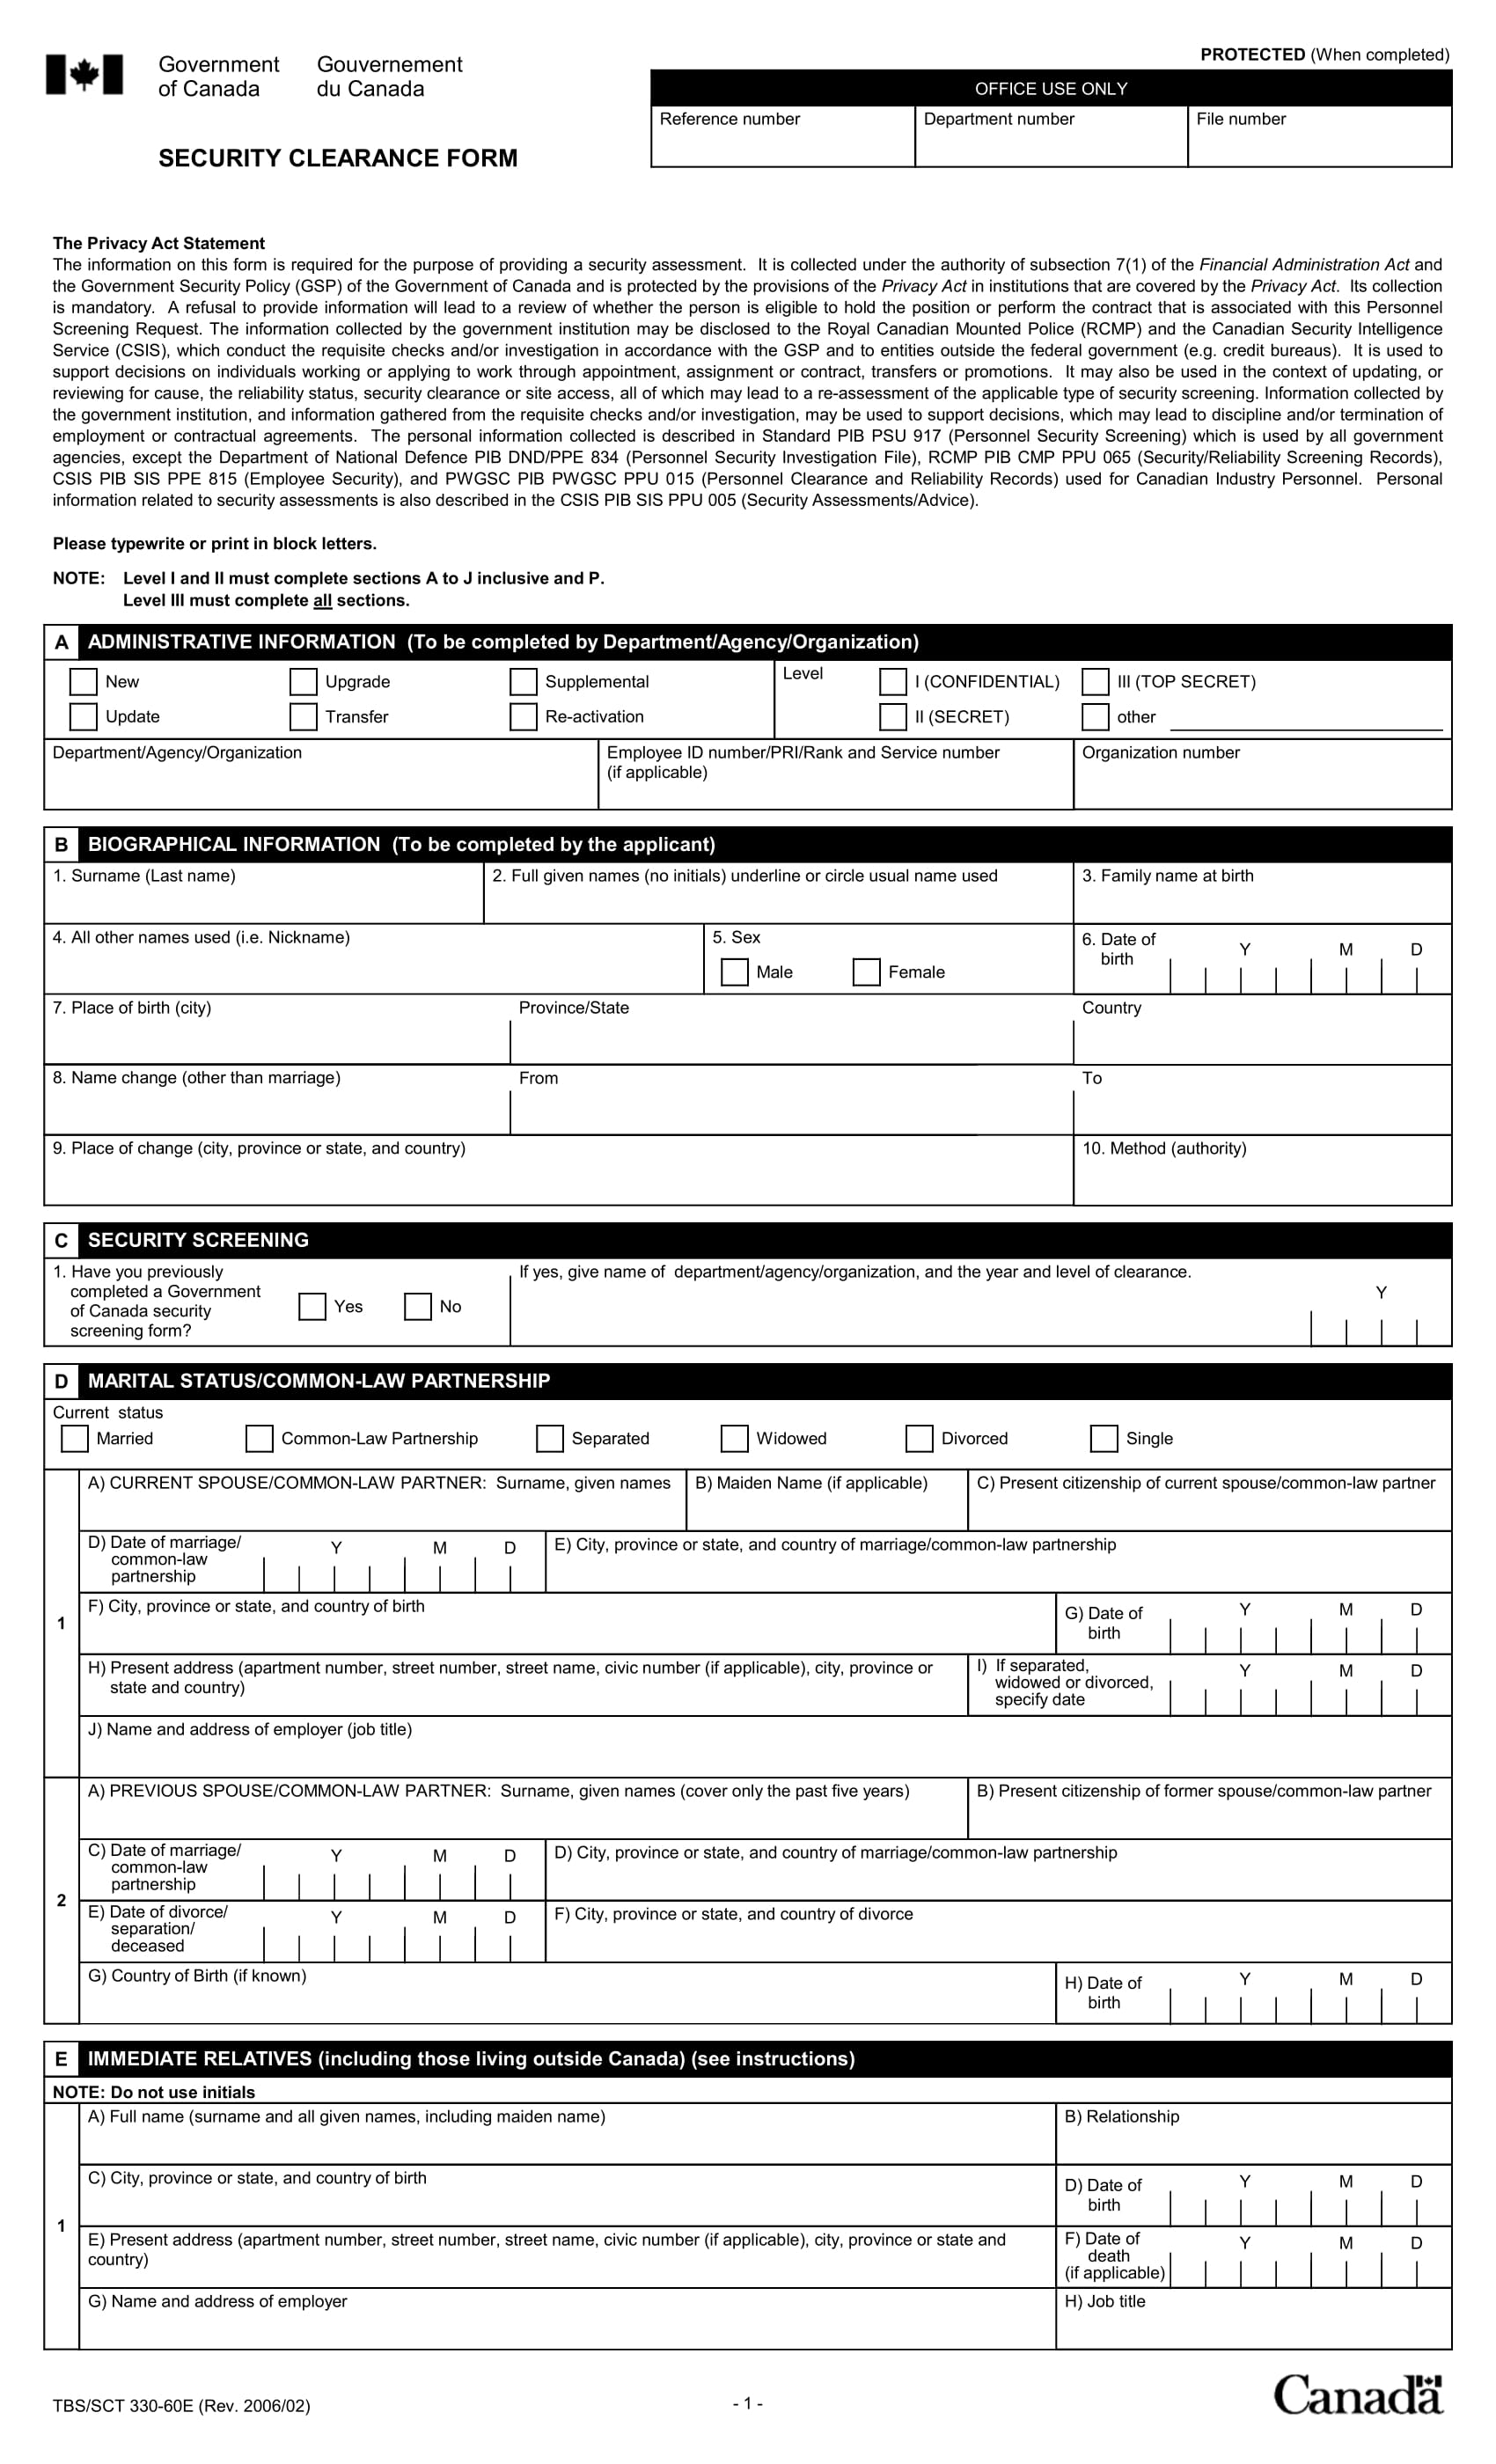 generic security clearance form sample